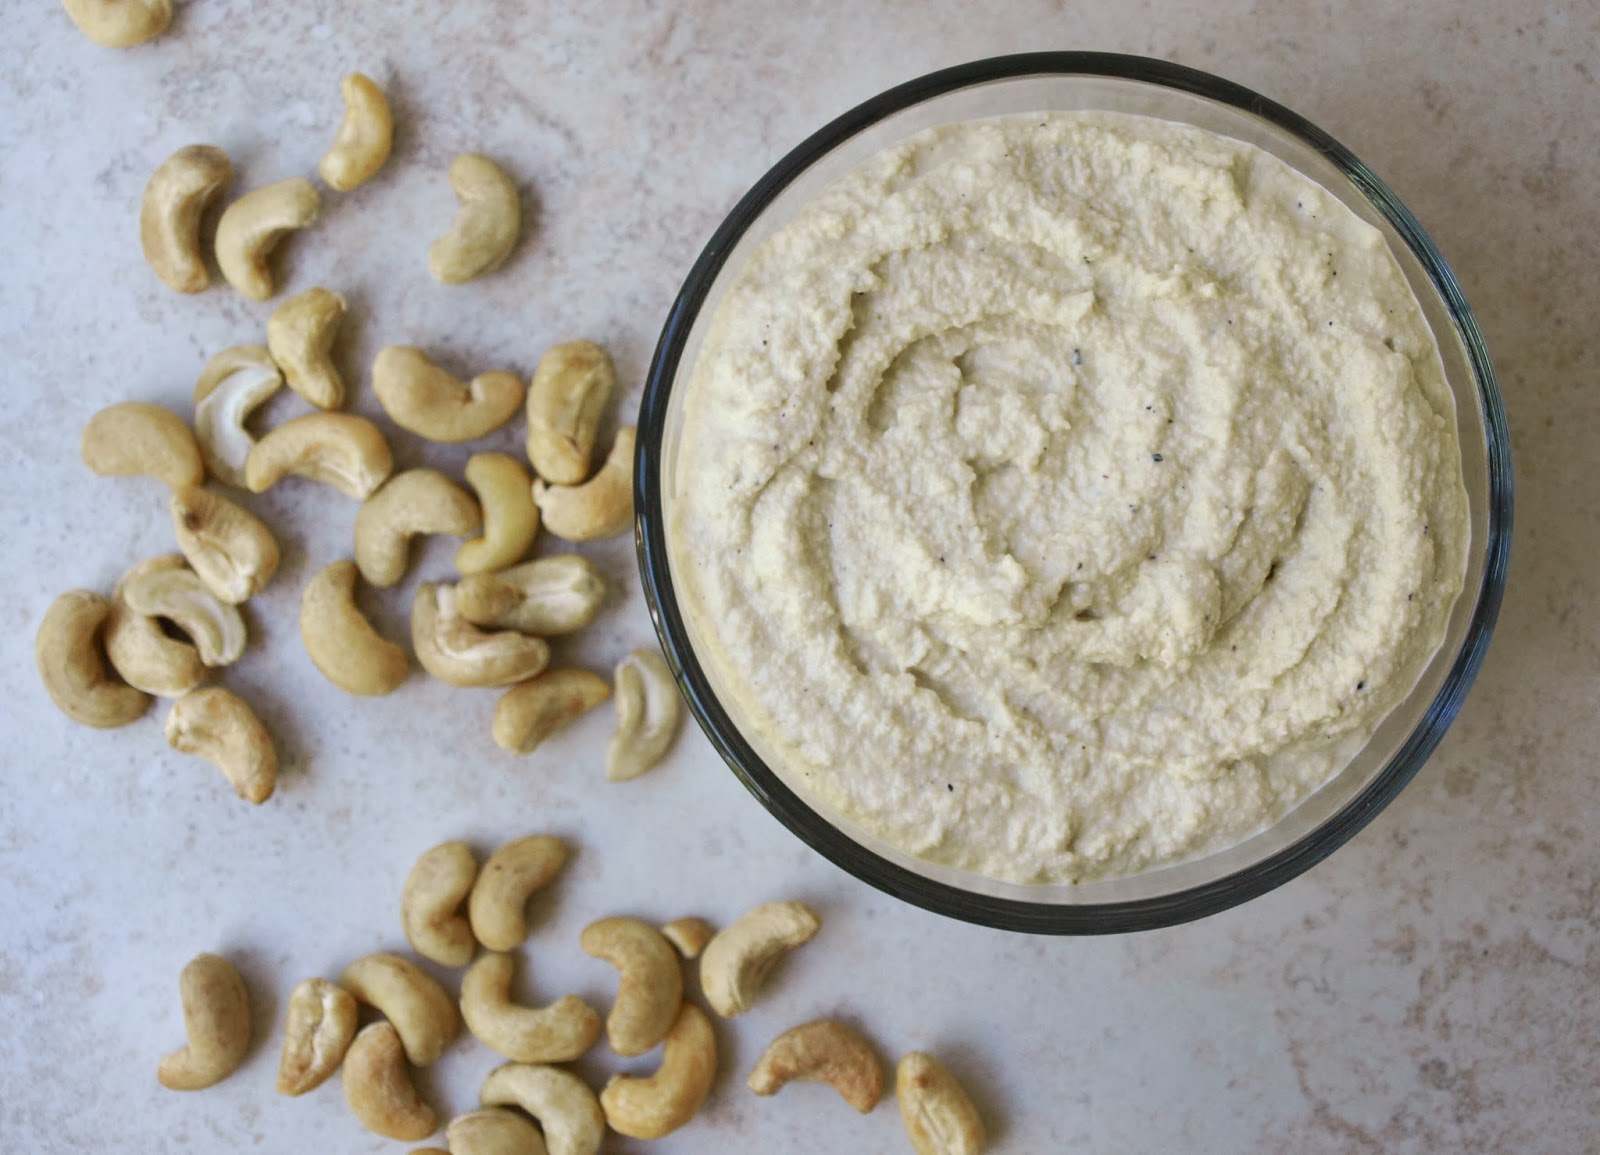 A bowl of cashew cheese, and some cashew nuts on a white surface